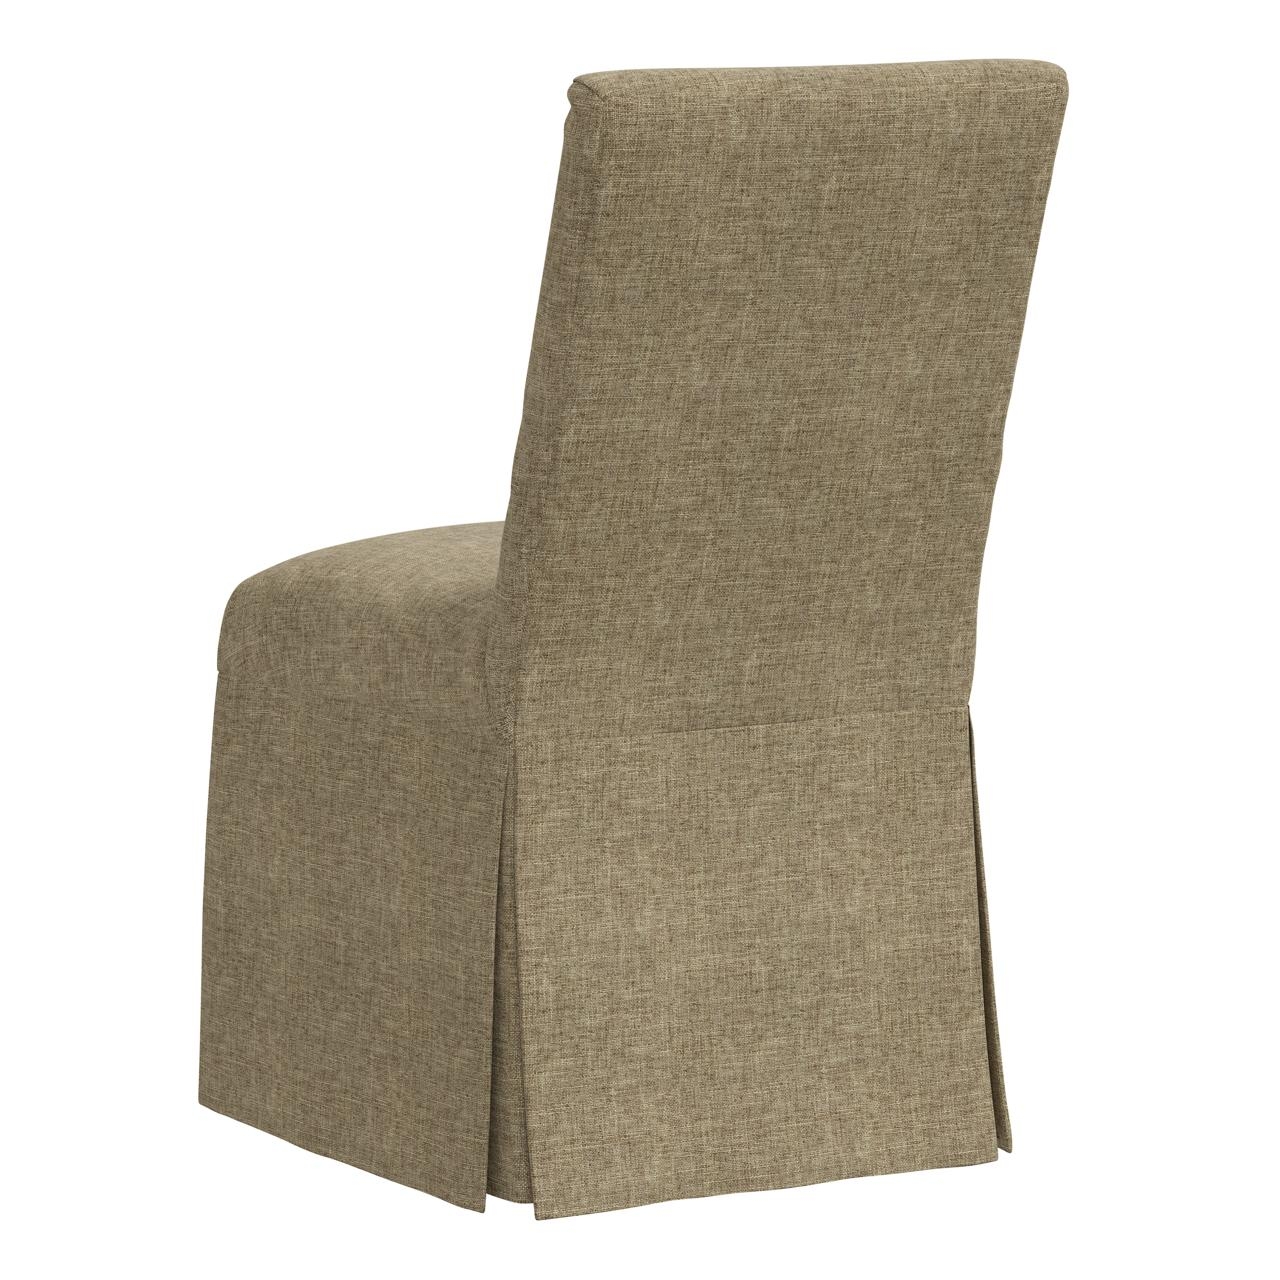 Alice Slipcover Dining Chair in Zuma Linen - Image 3